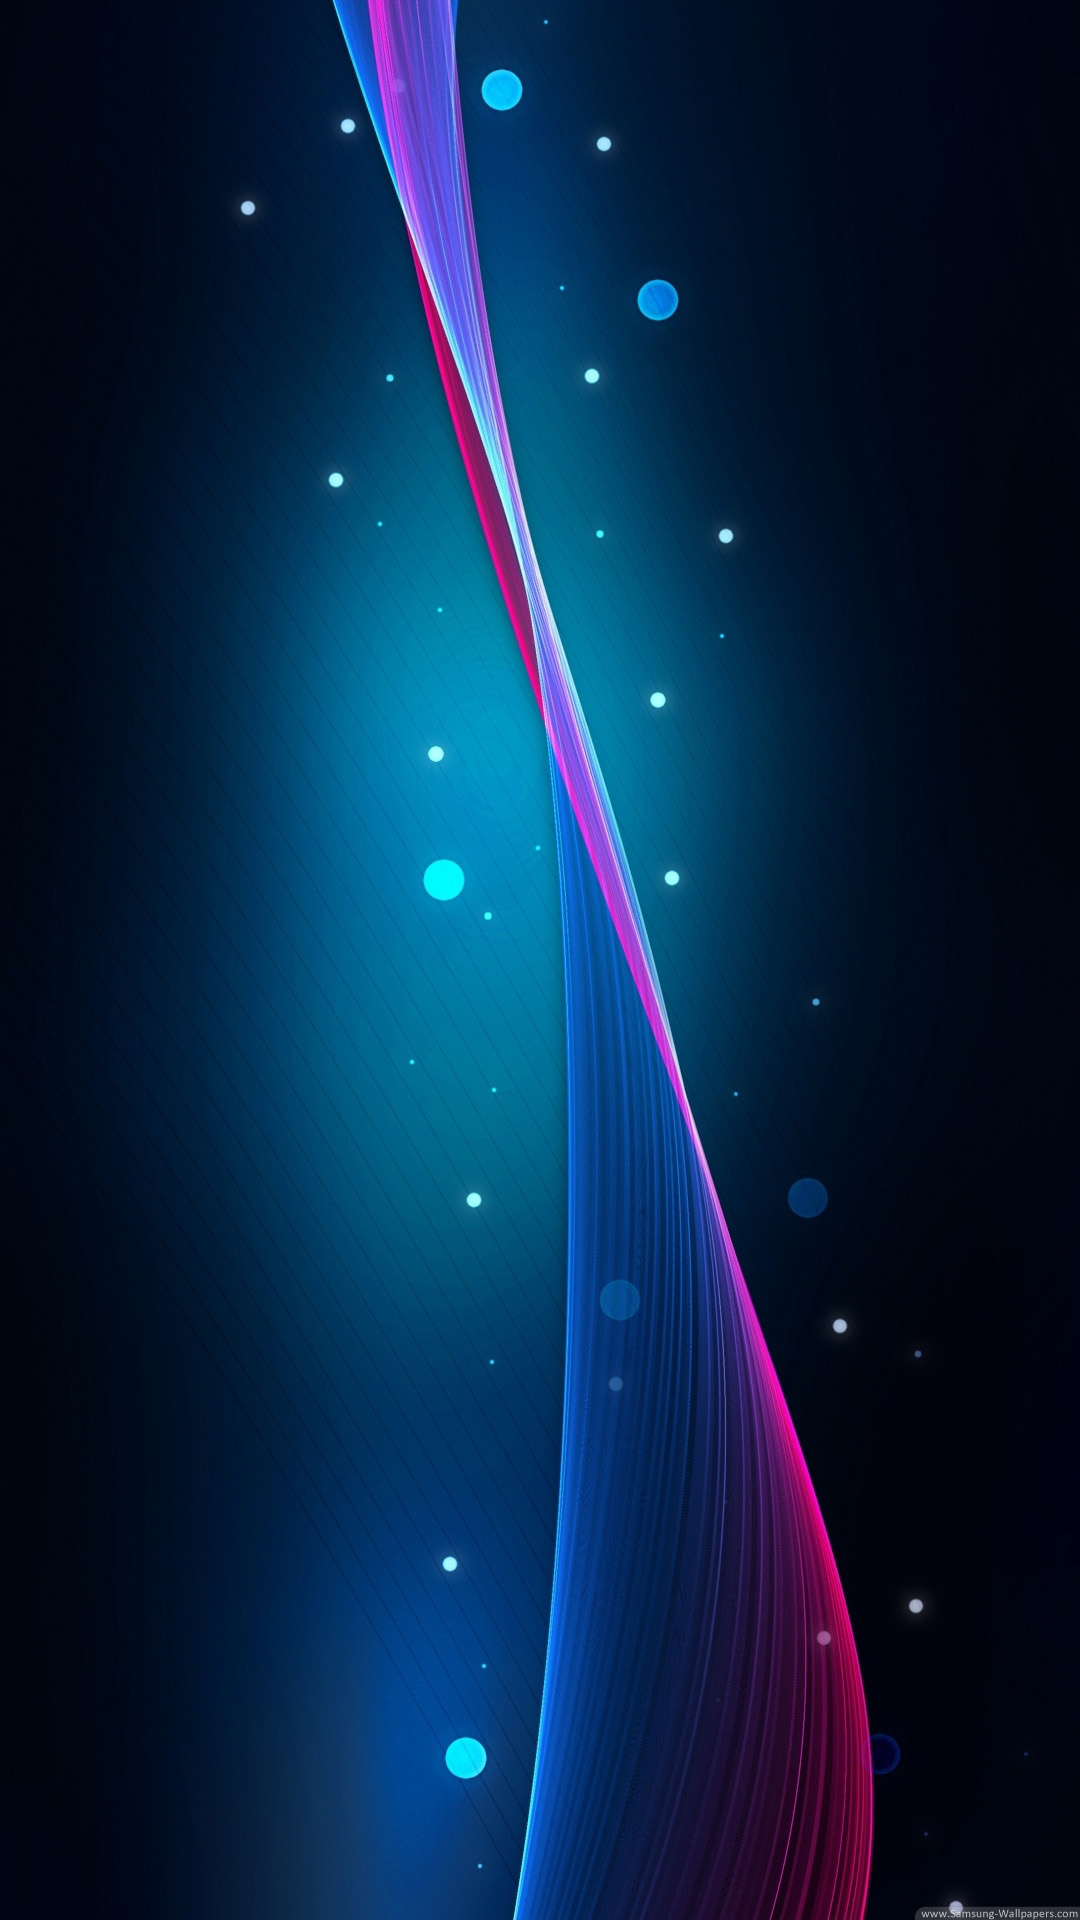 49+] Samsung Wallpapers Free Download